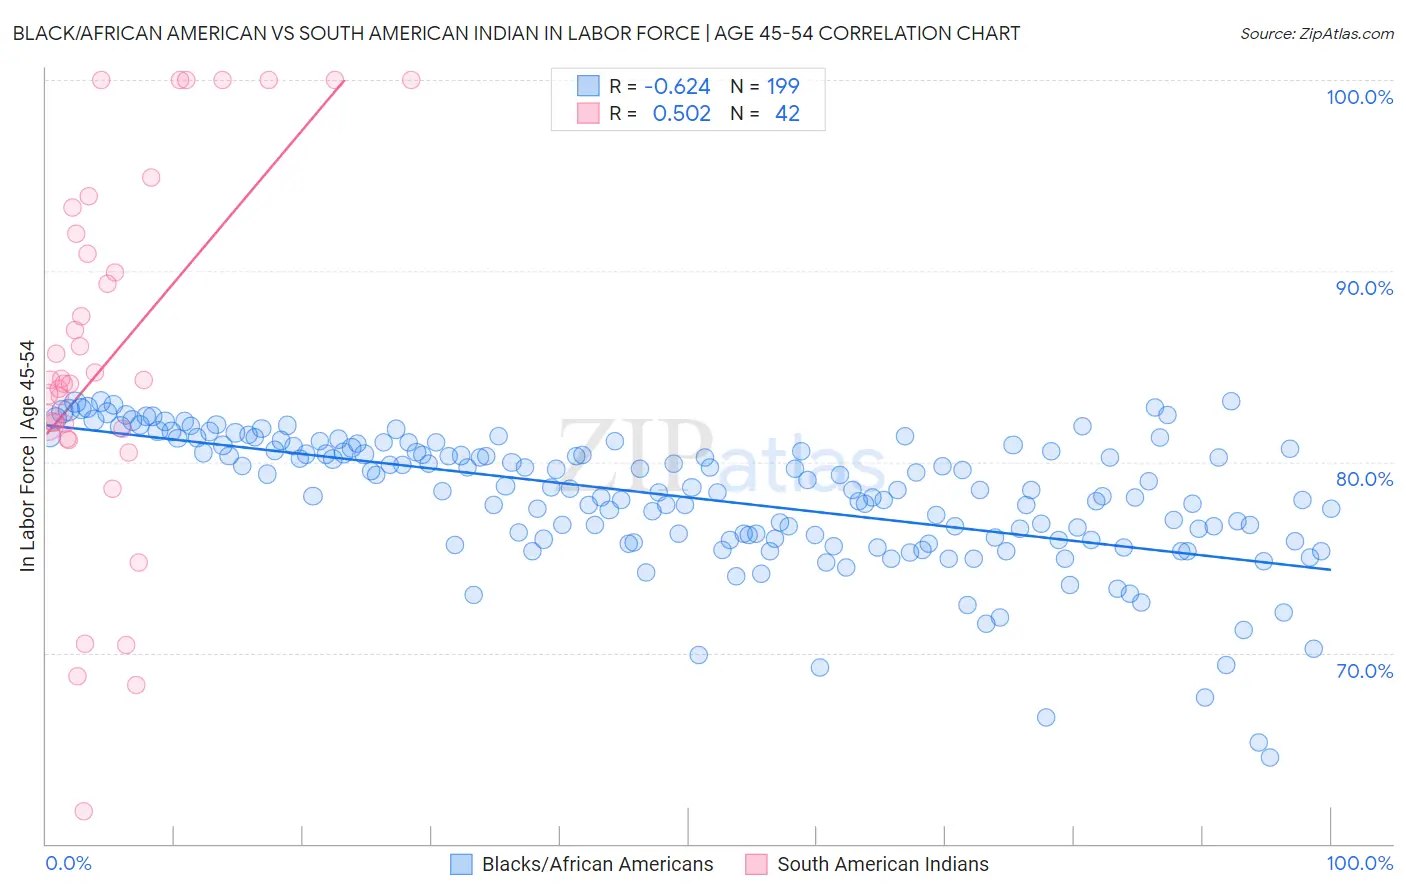 Black/African American vs South American Indian In Labor Force | Age 45-54